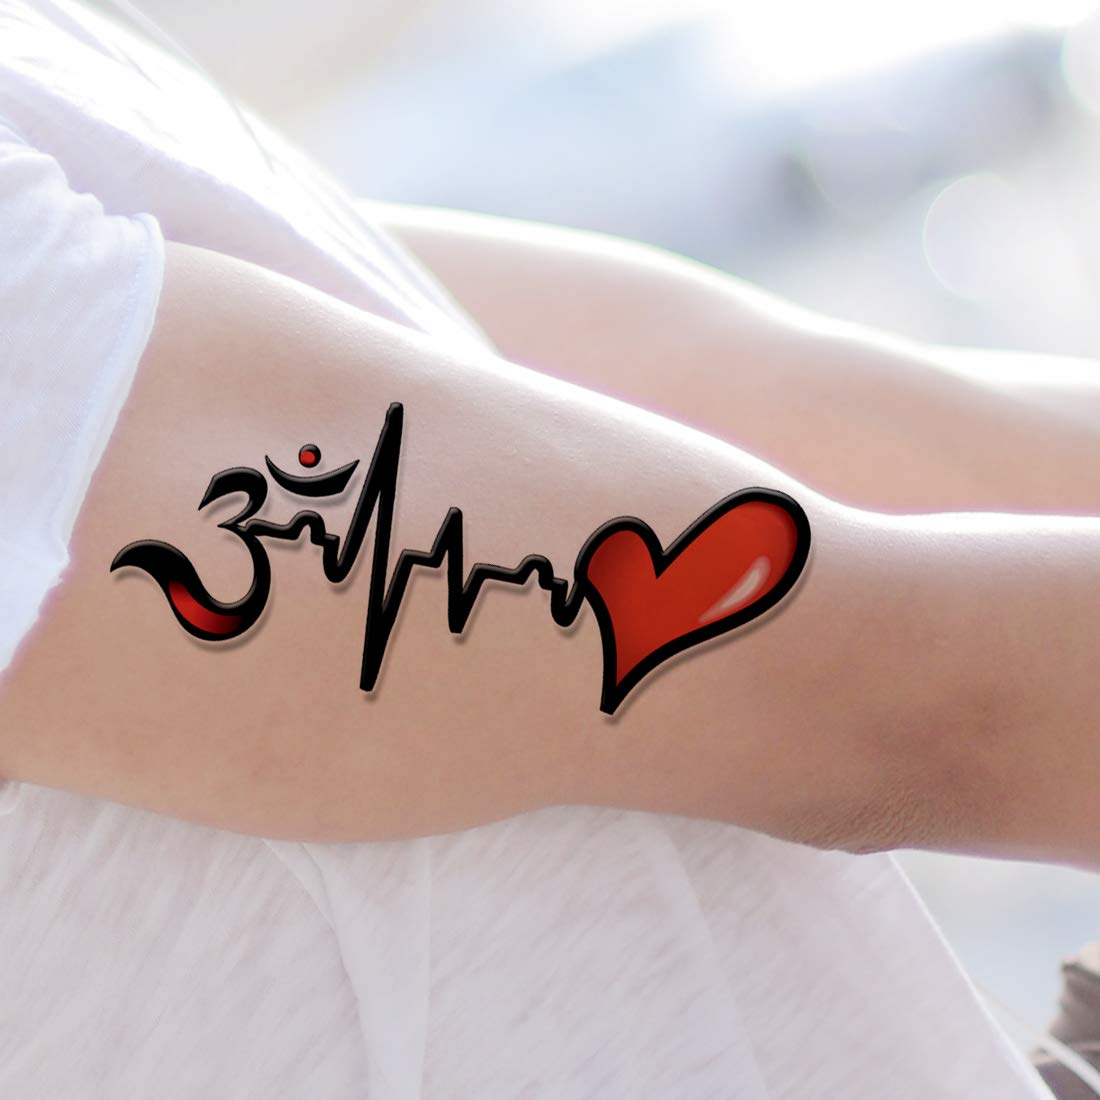 Everjoy Red Black Love Hearts Temporary Tattoos 15 Designs 2 Colors 360  Patterns, Waterproof Valentines Decal Tattoo Stickers for Women -  Walmart.com